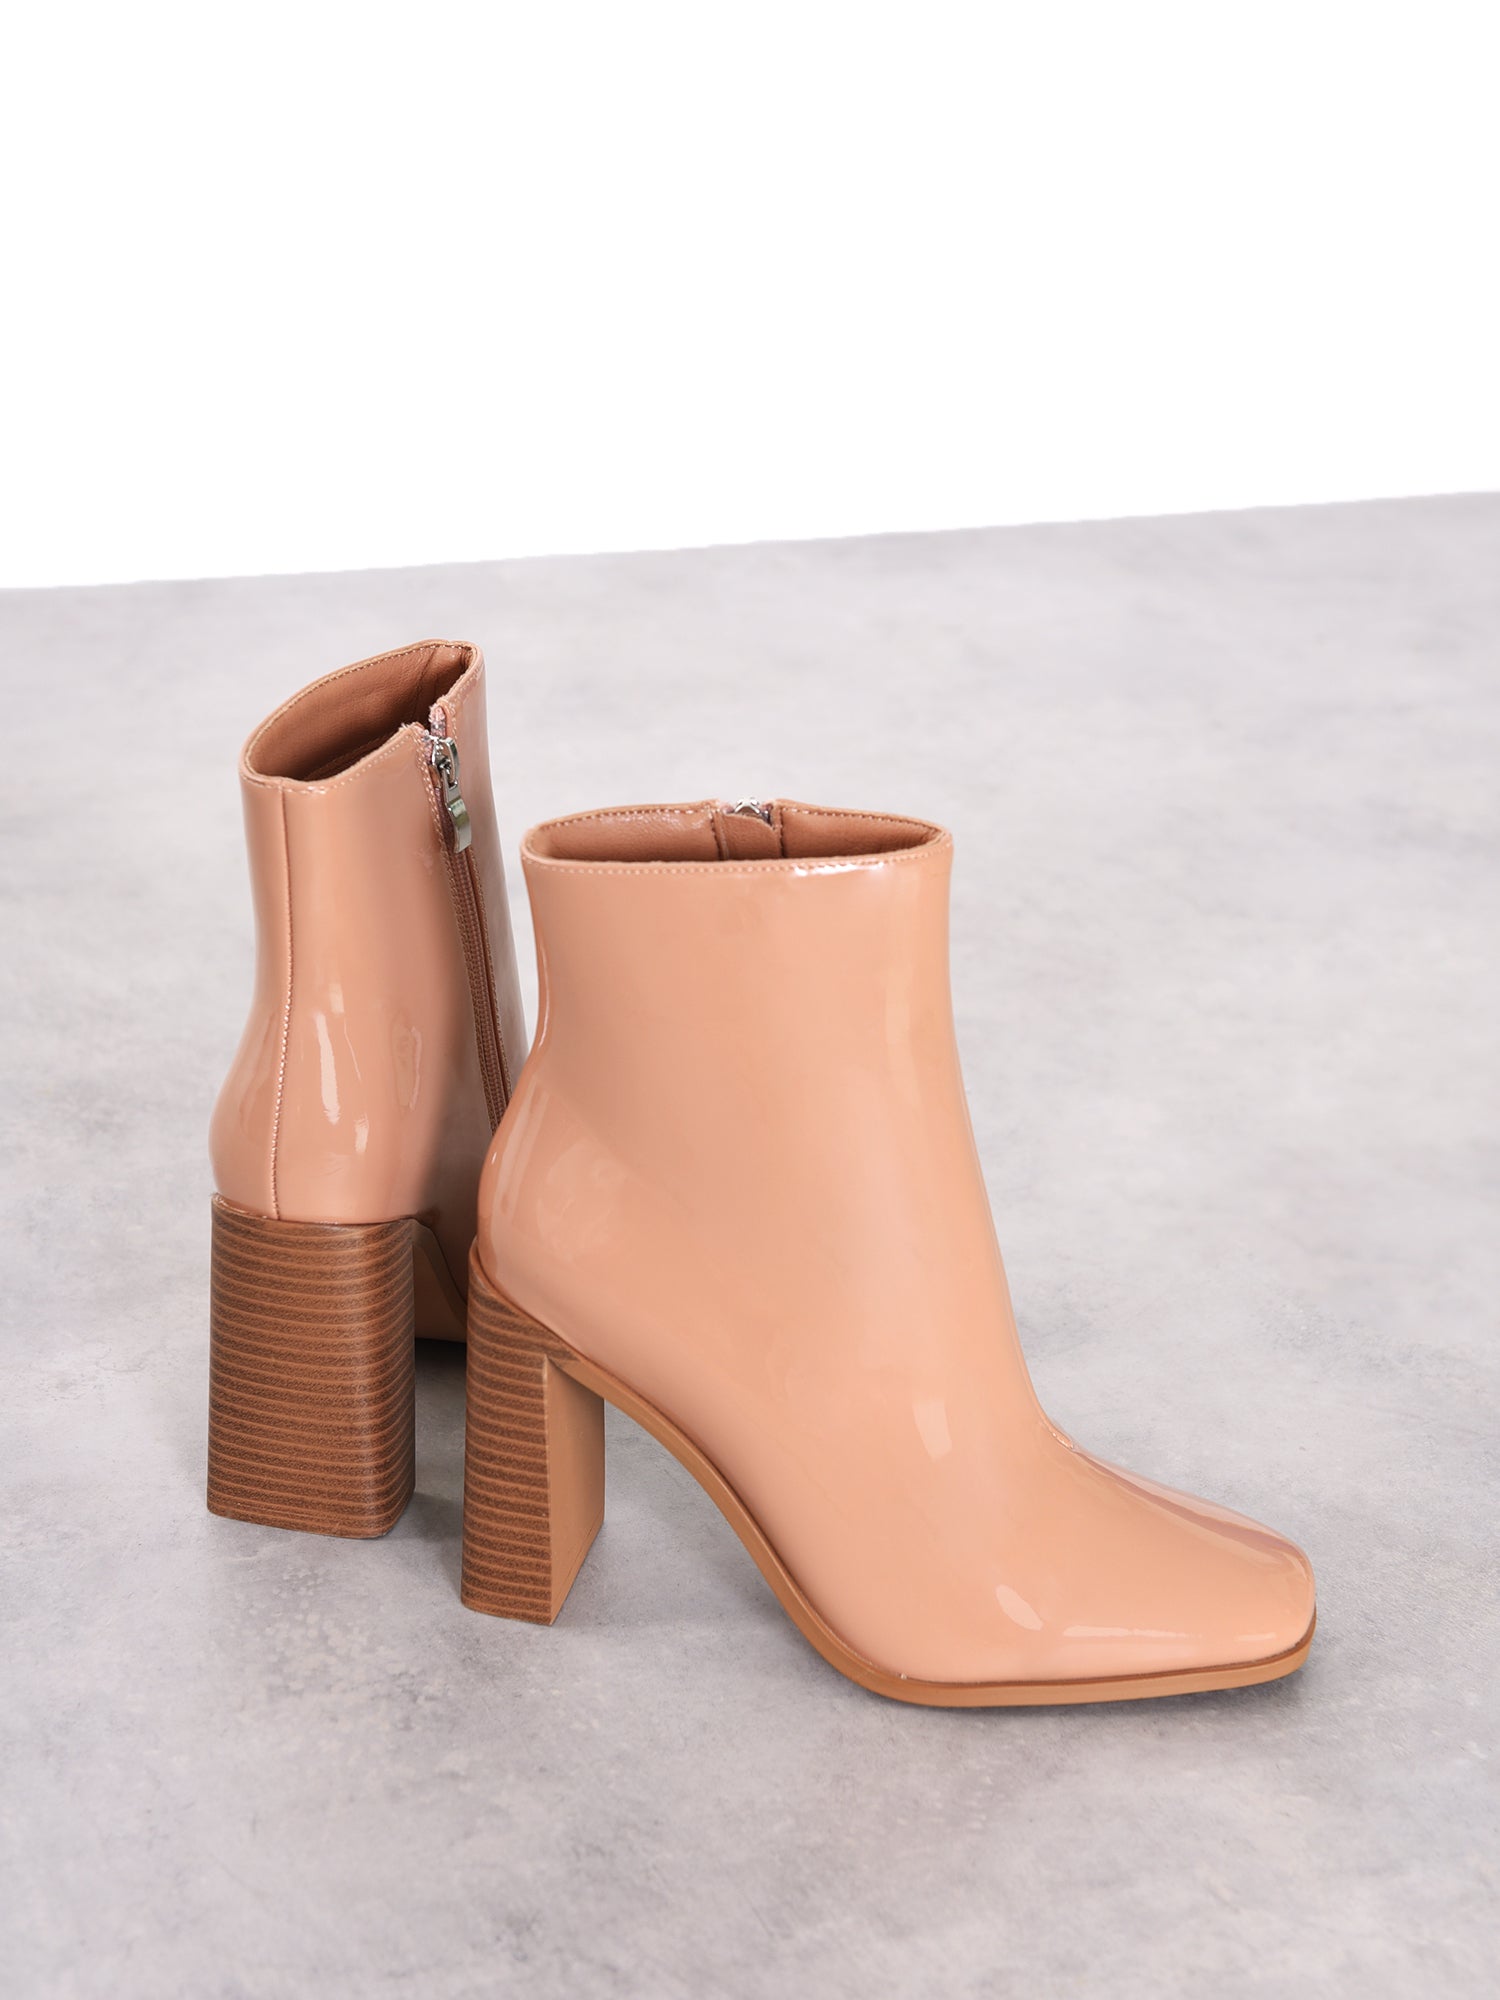 Beige Patent Square-Toe Chunky Heel Boots